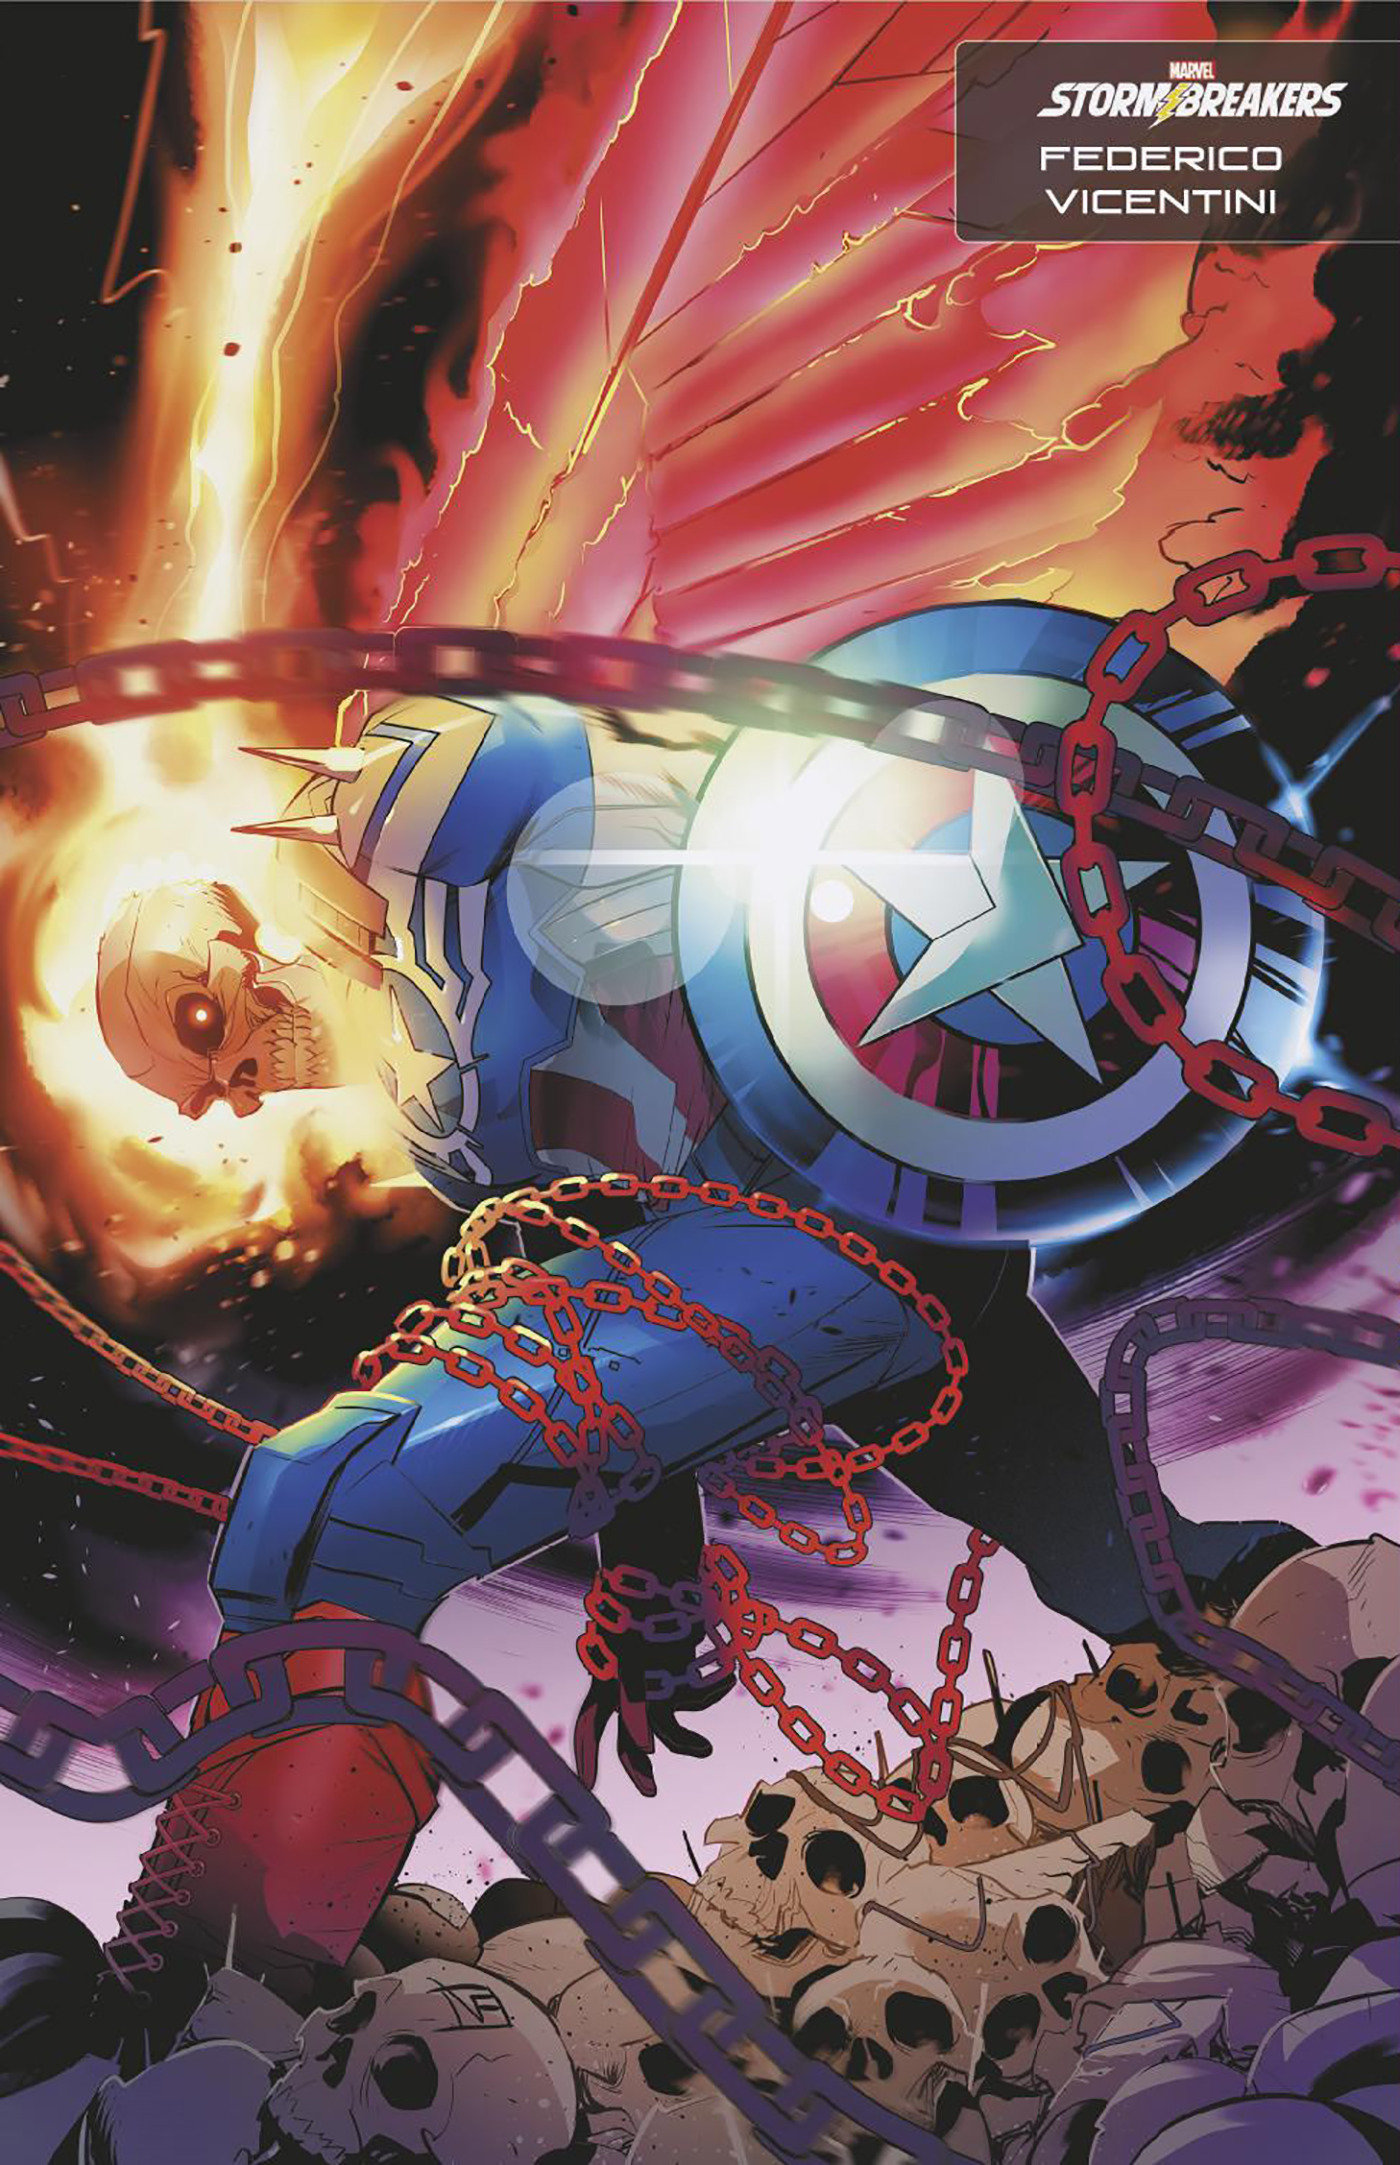 Avengers #14 Federico Vicentini Stormbreakers Variant